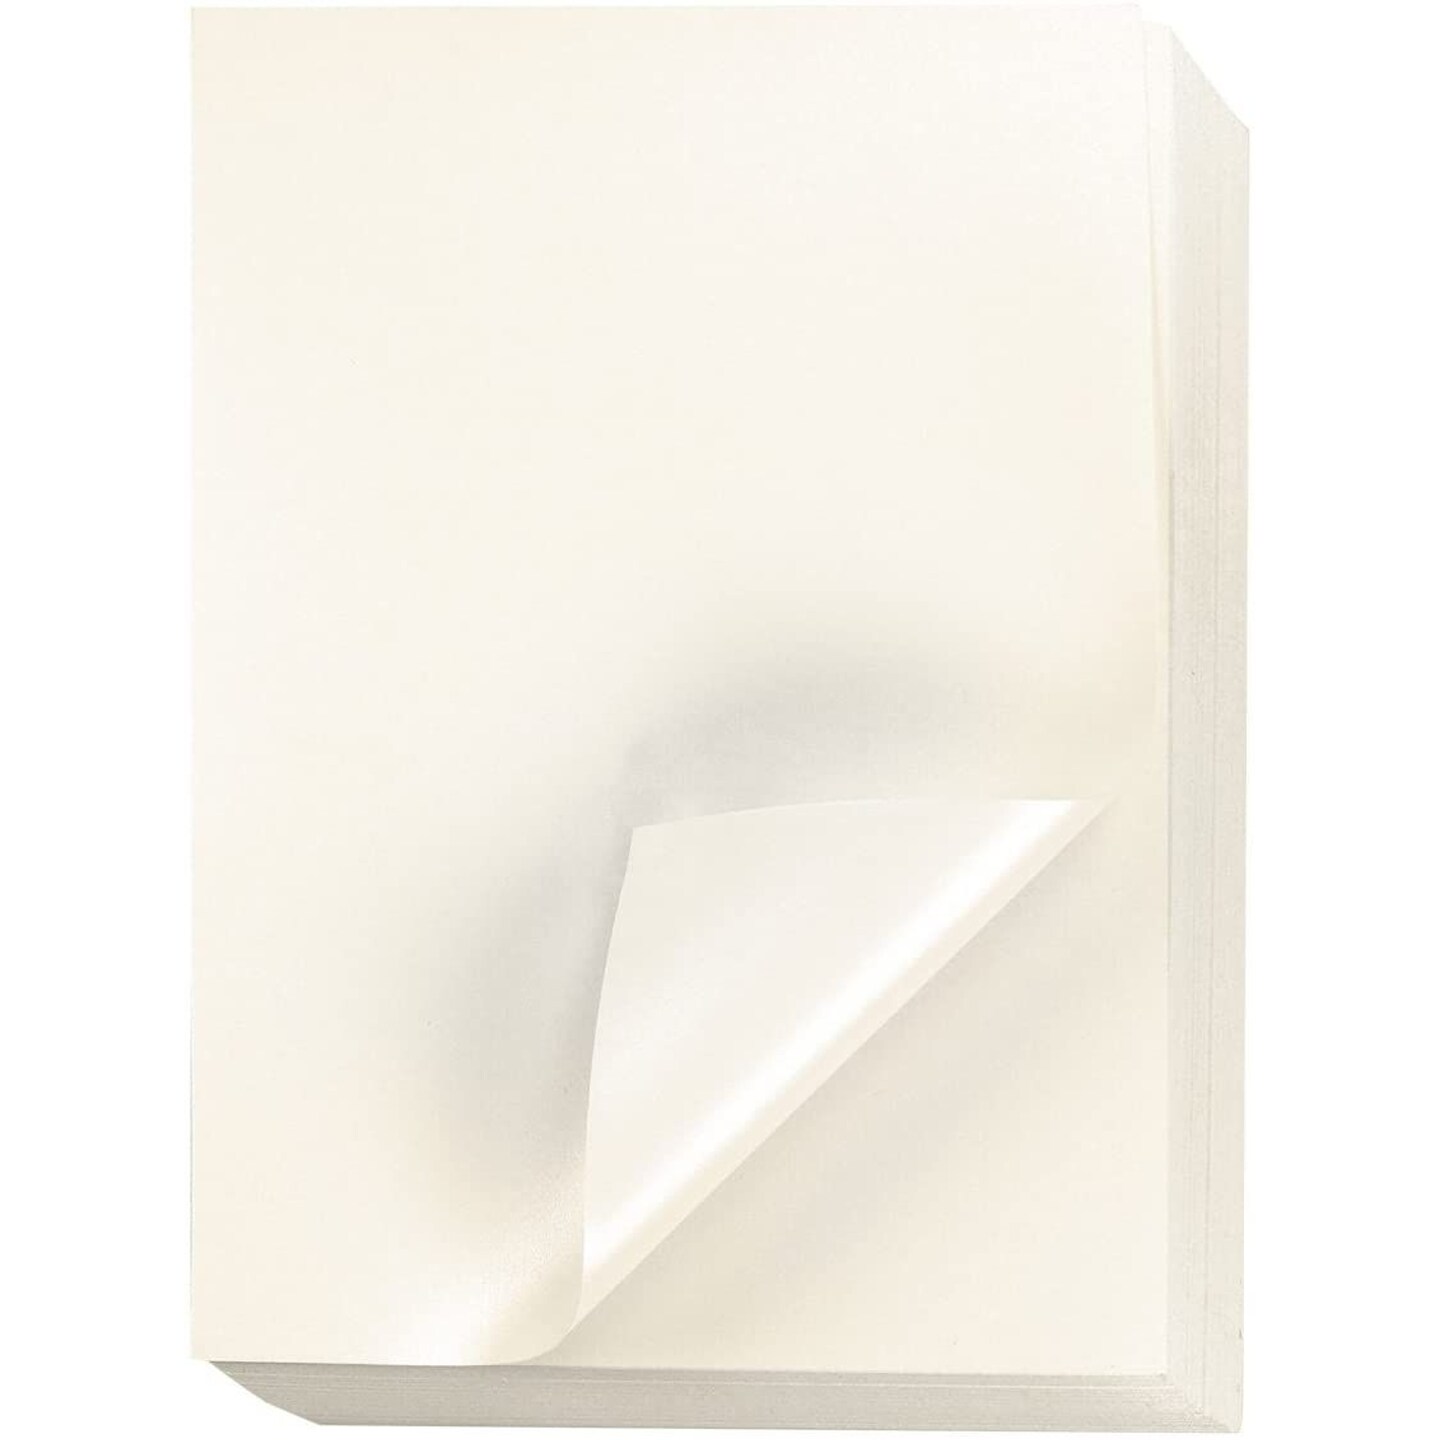  100 Pack Glassine Paper Sheets, 16 x 20 Inches for